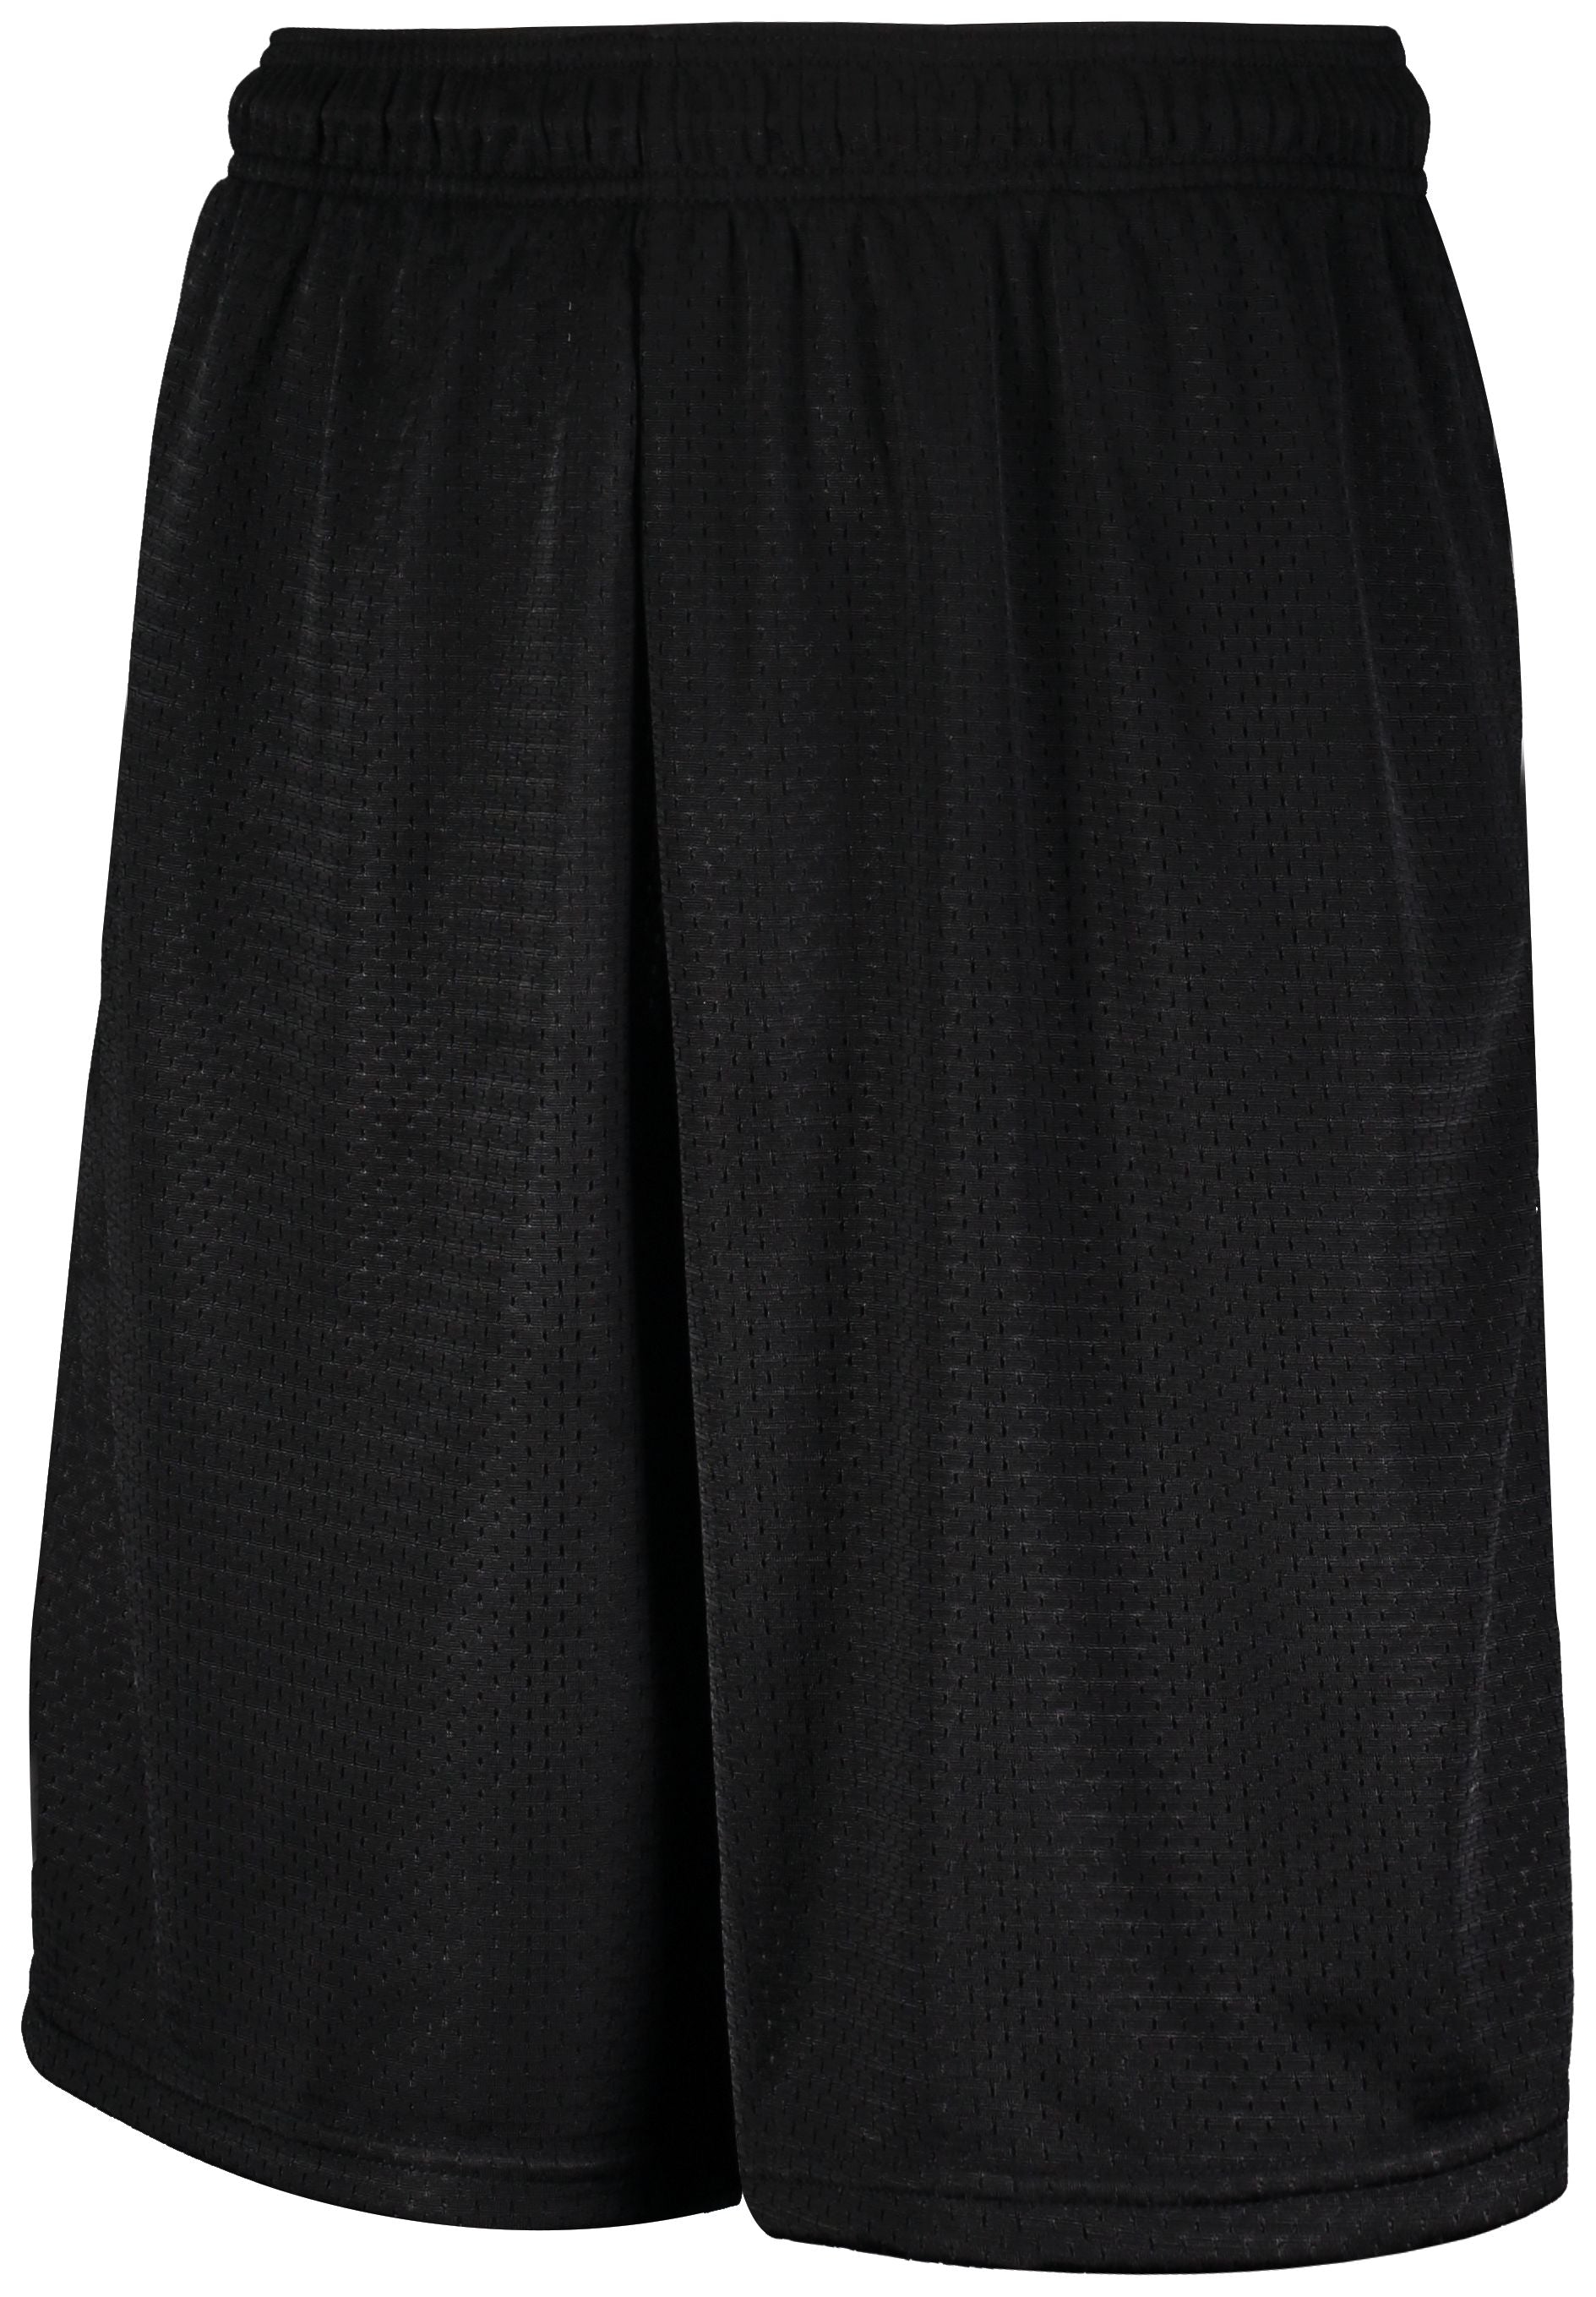 Russell Athletic Mesh Shorts With Pockets